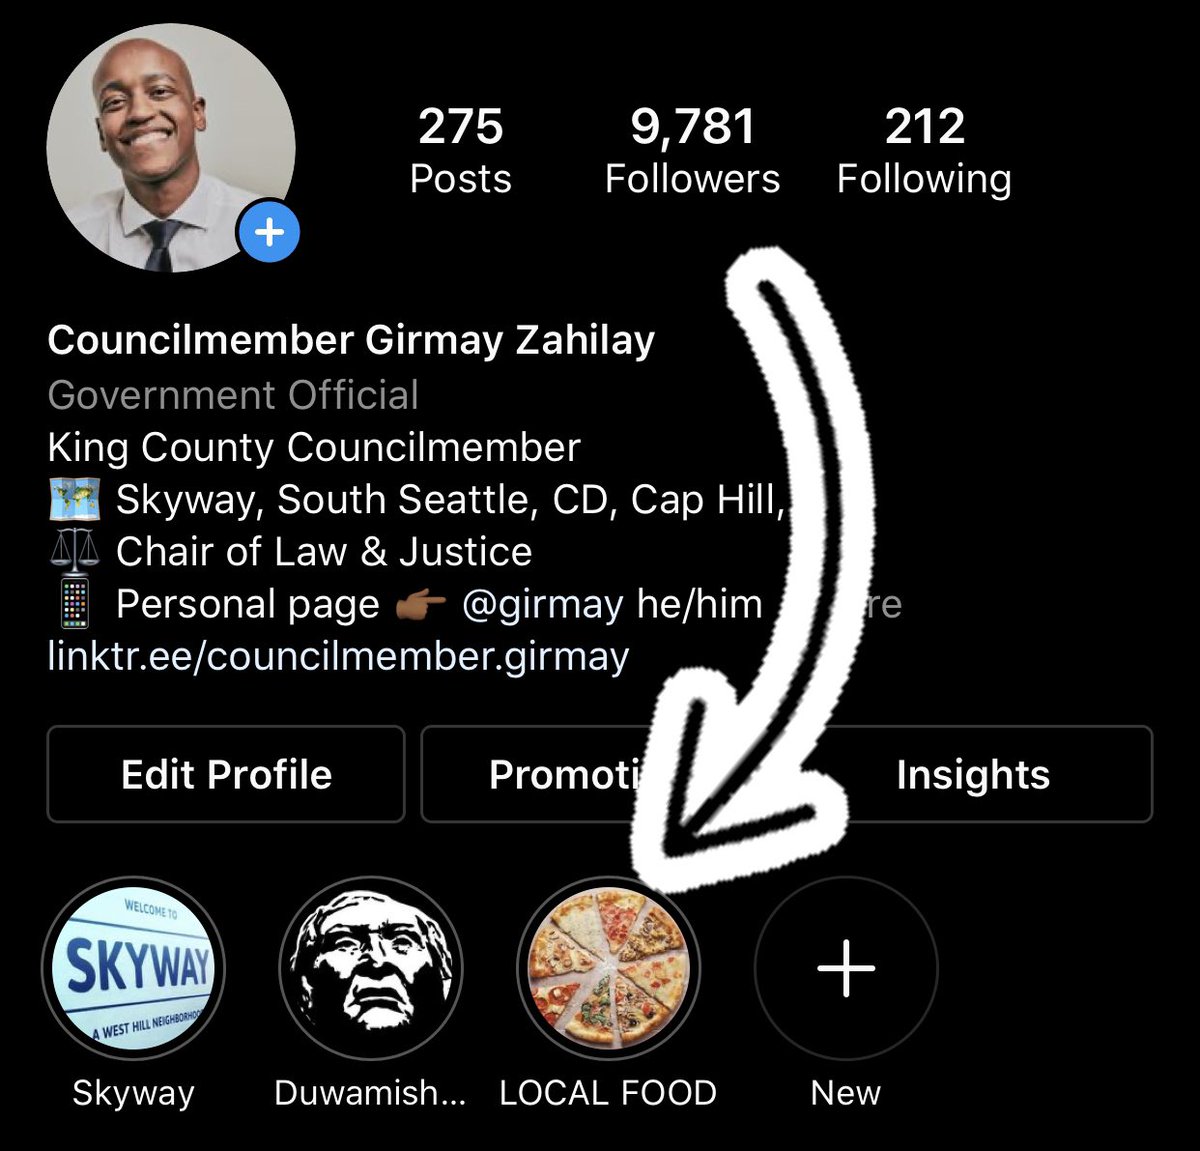 6. A couple times a month, I order take out or delivery from a new local restaurant. This lets me try a meal I haven’t had before and support a local small business. I collected local restaurant suggestions and shared them on Instagram. Visit my page on IG and check them out: